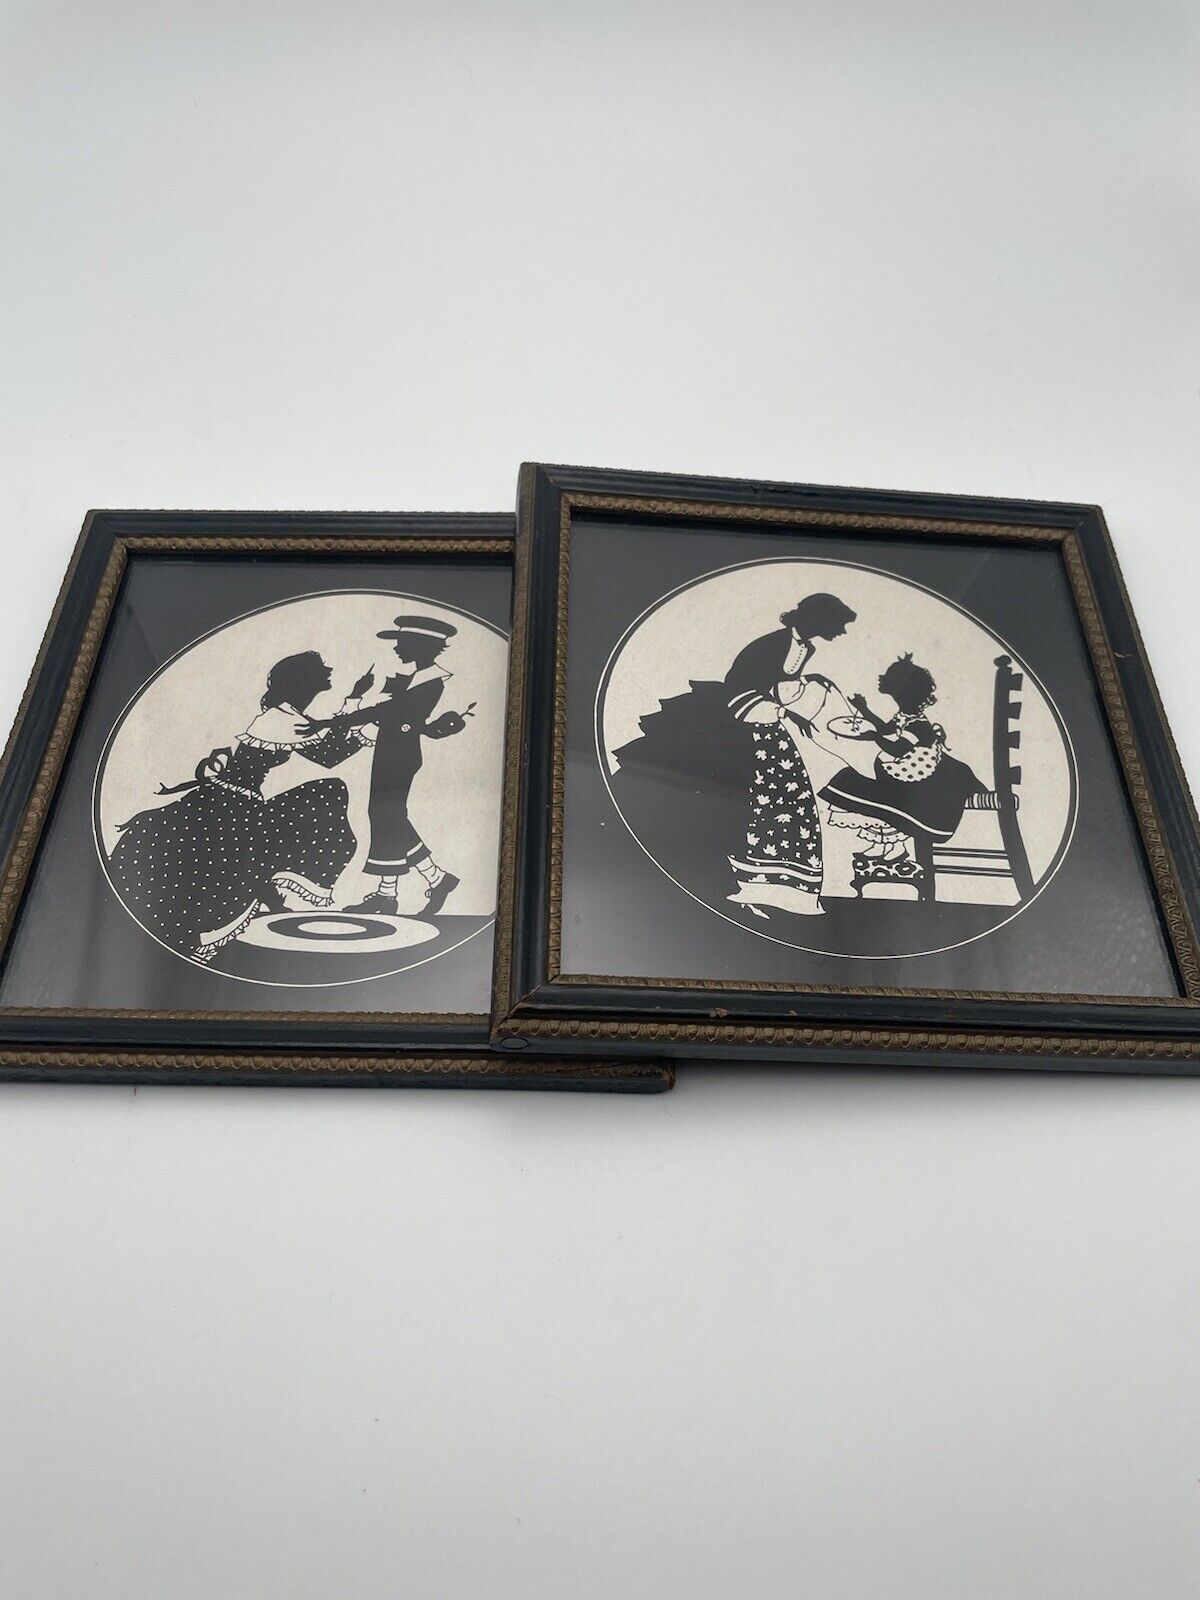 Pair Of Vintage Reliance Silhouette Pictures Frames Black And White Adorable